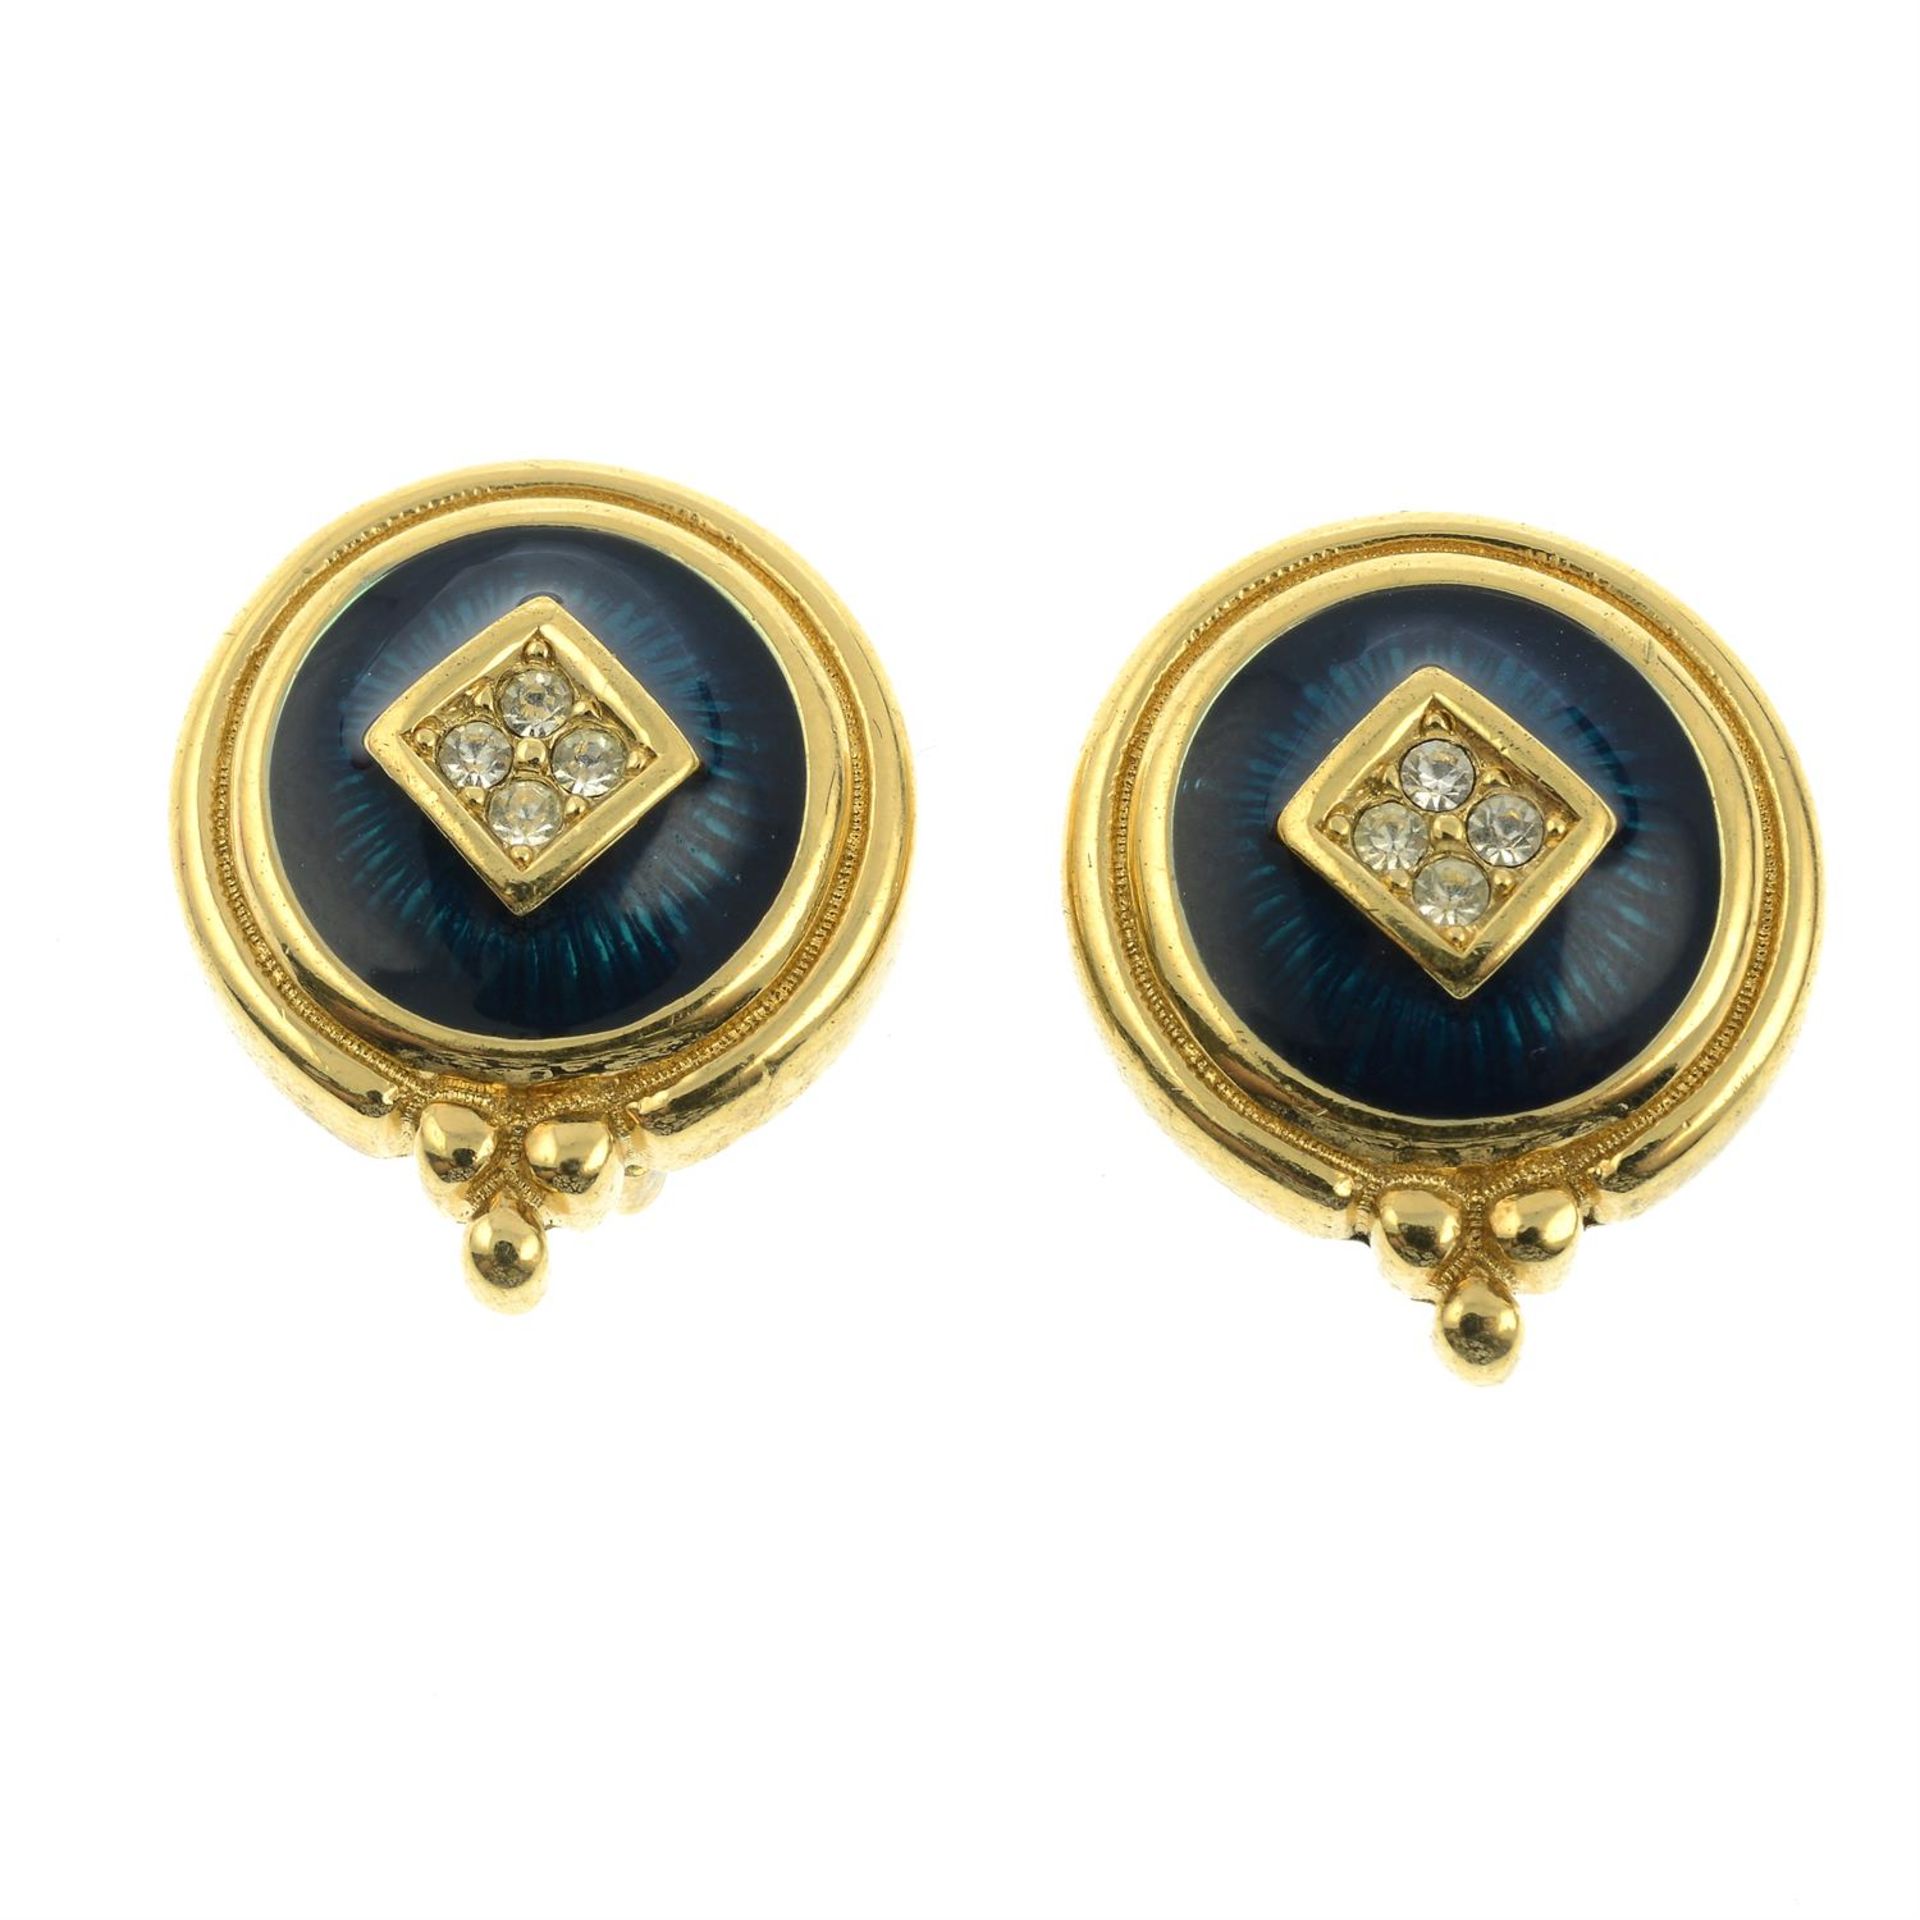 BURBERRY - a pair of clip-on earrings.